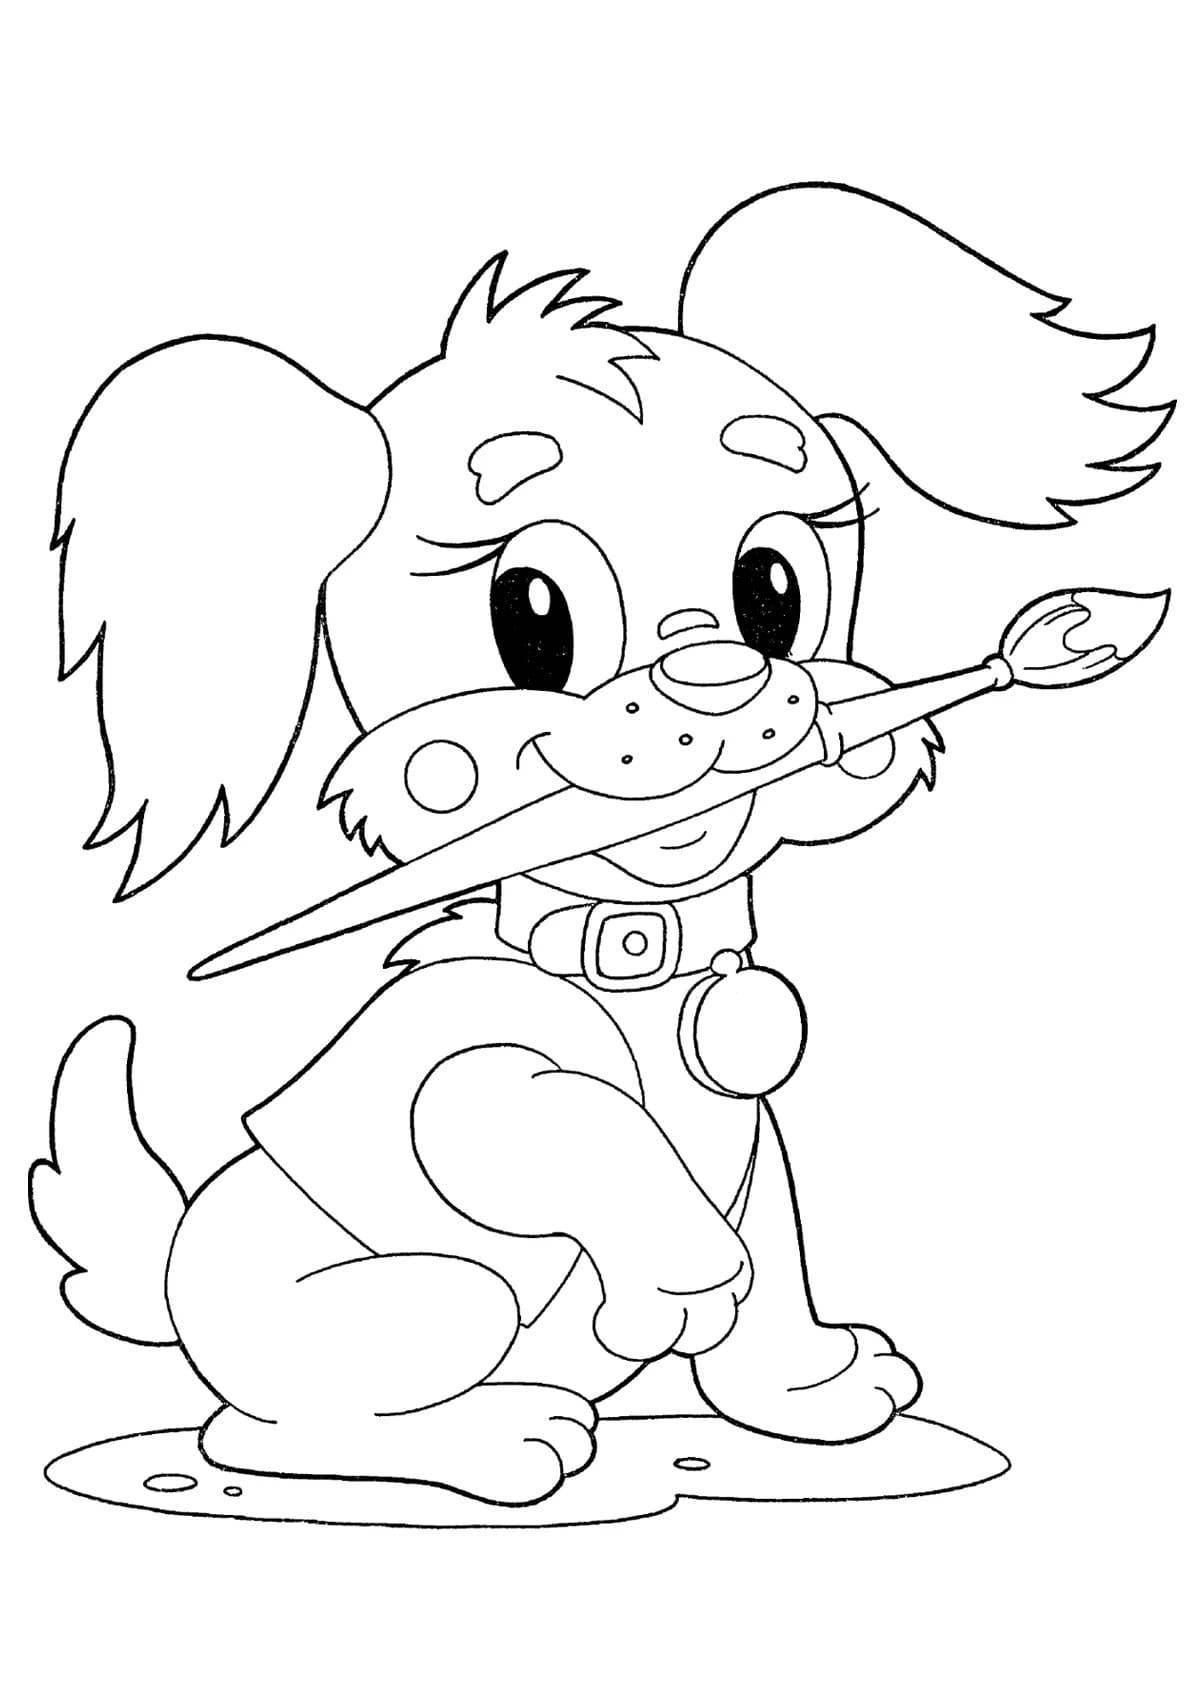 Wiggly doggie coloring page